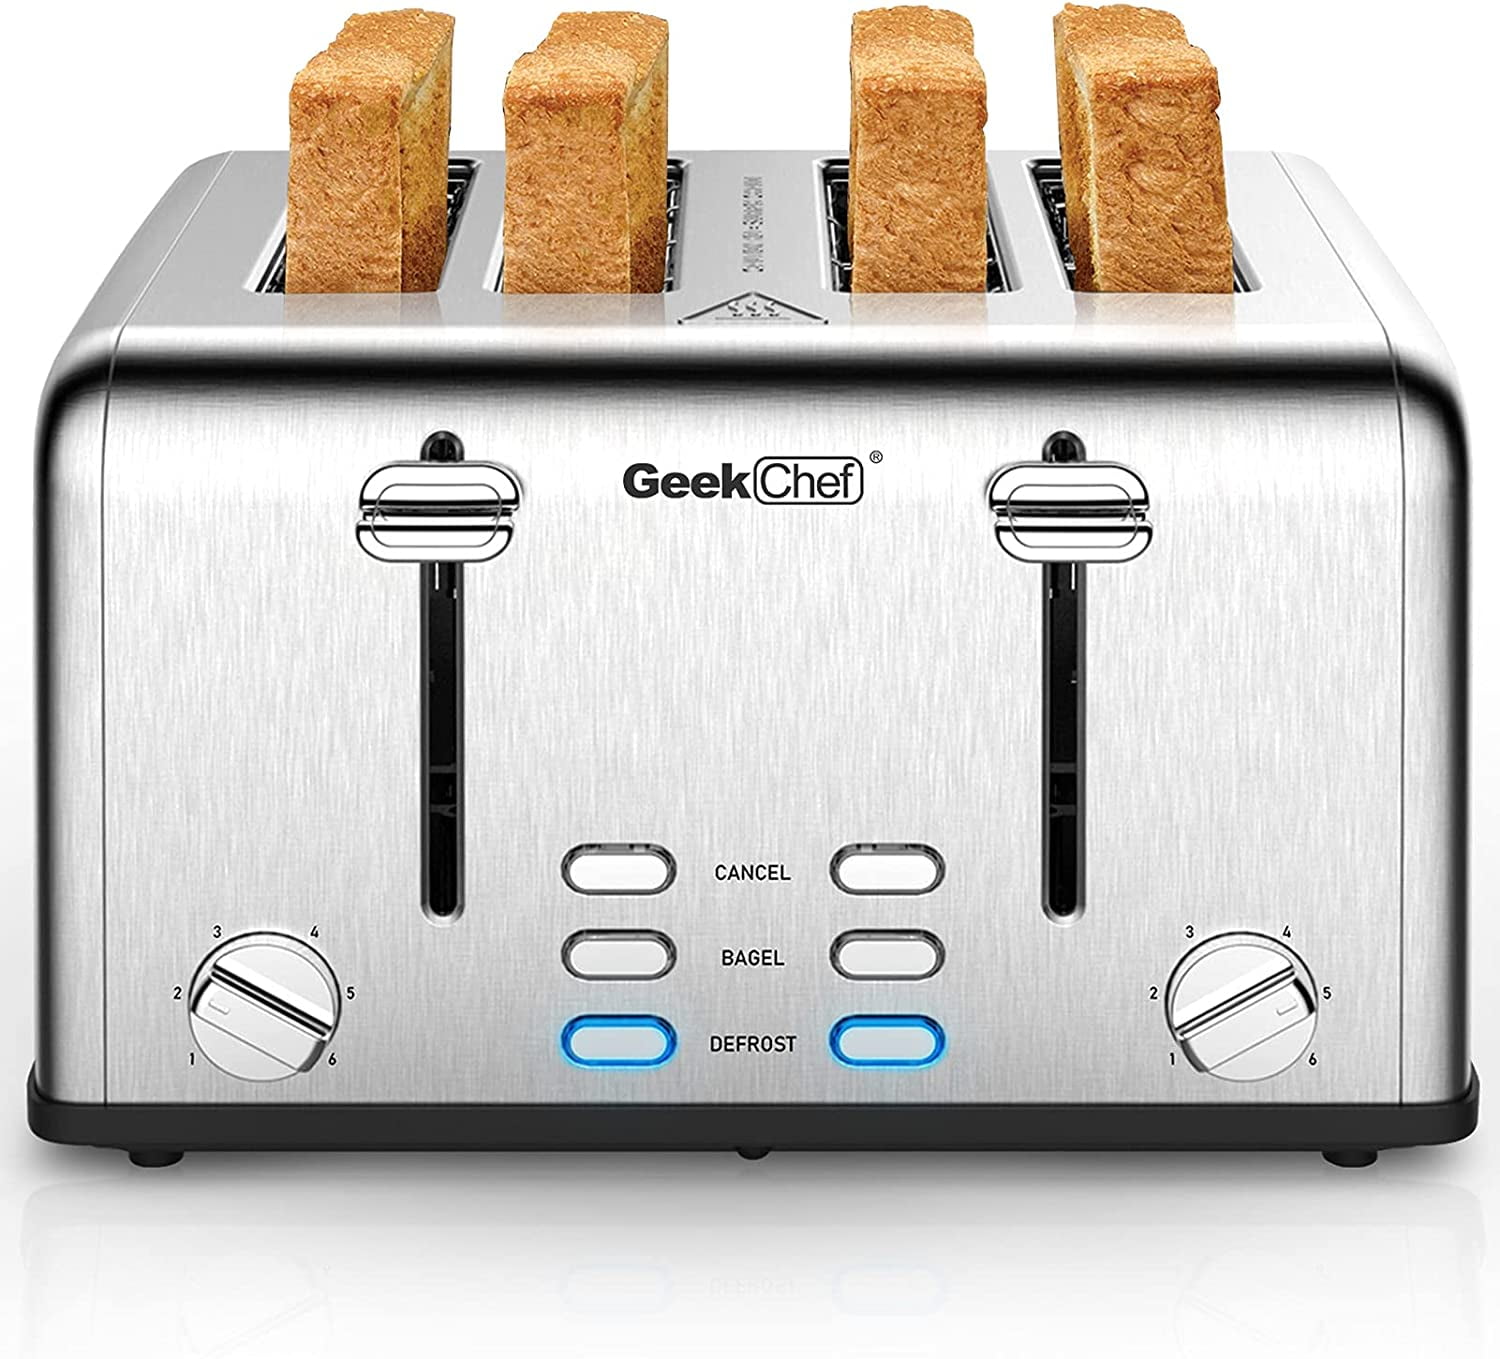  GE Stainless Steel Toaster, 4 Slice, Extra Wide Slots for  Toasting Bagels, Breads, Waffles & More, 7 Shade Options for the Entire  Household to Enjoy